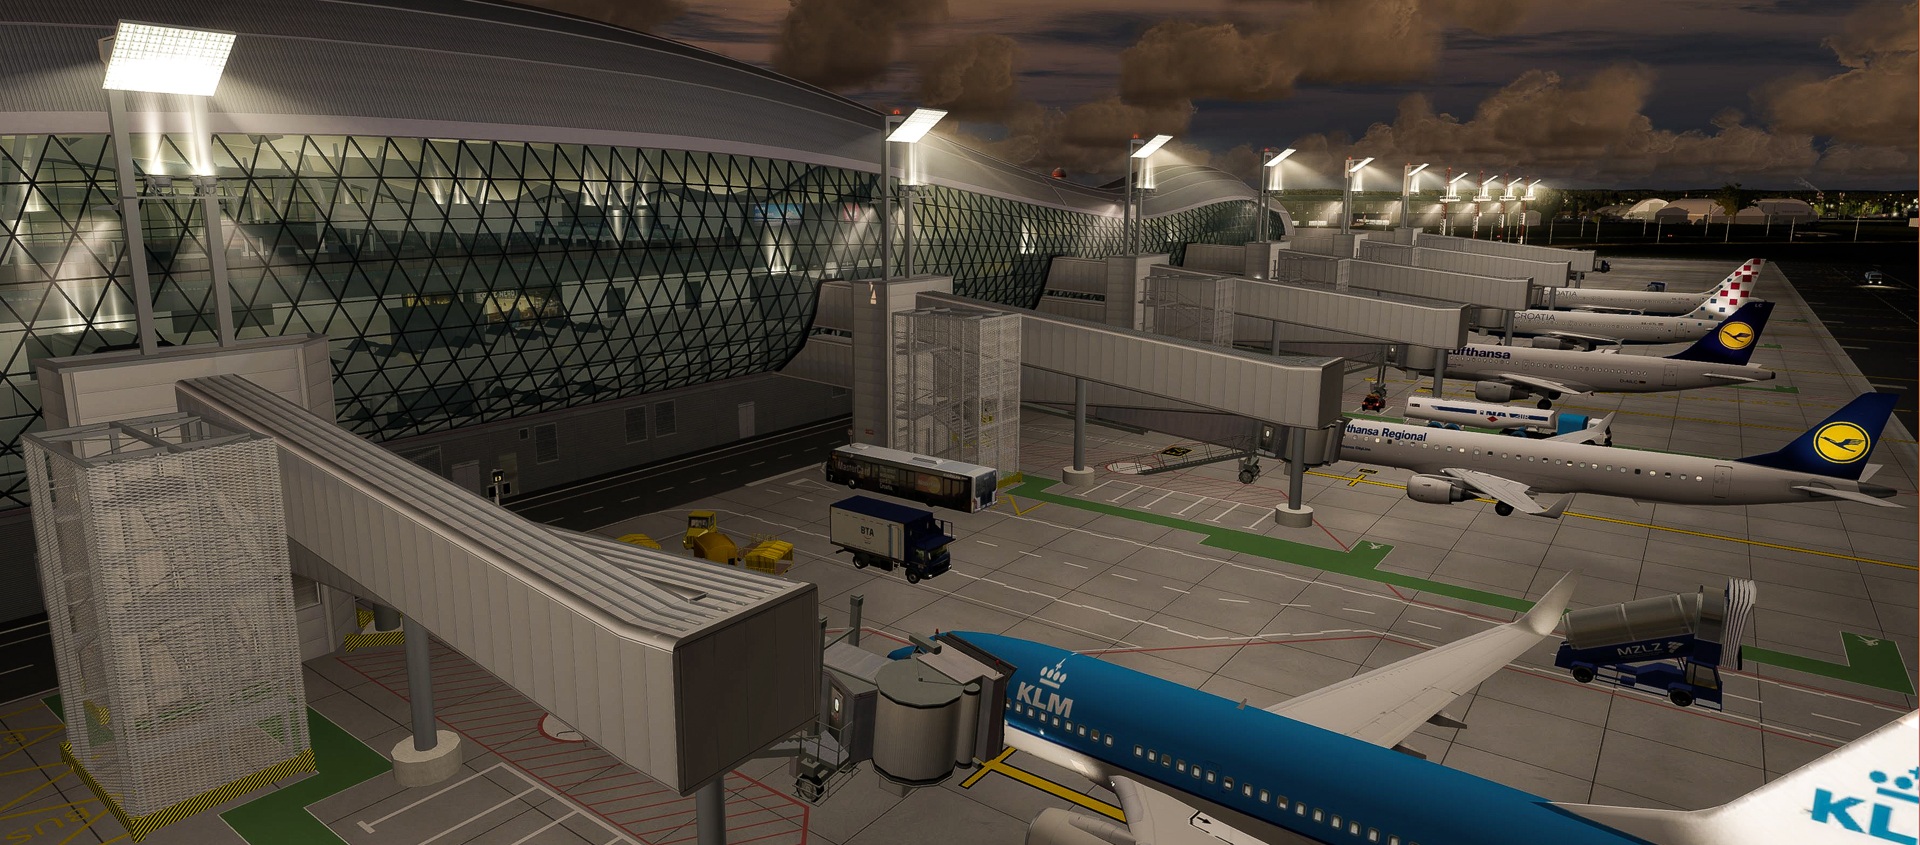 Aerosoft Zagreb Professional for Prepar3D v4: View of the really futuristic looking main terminal